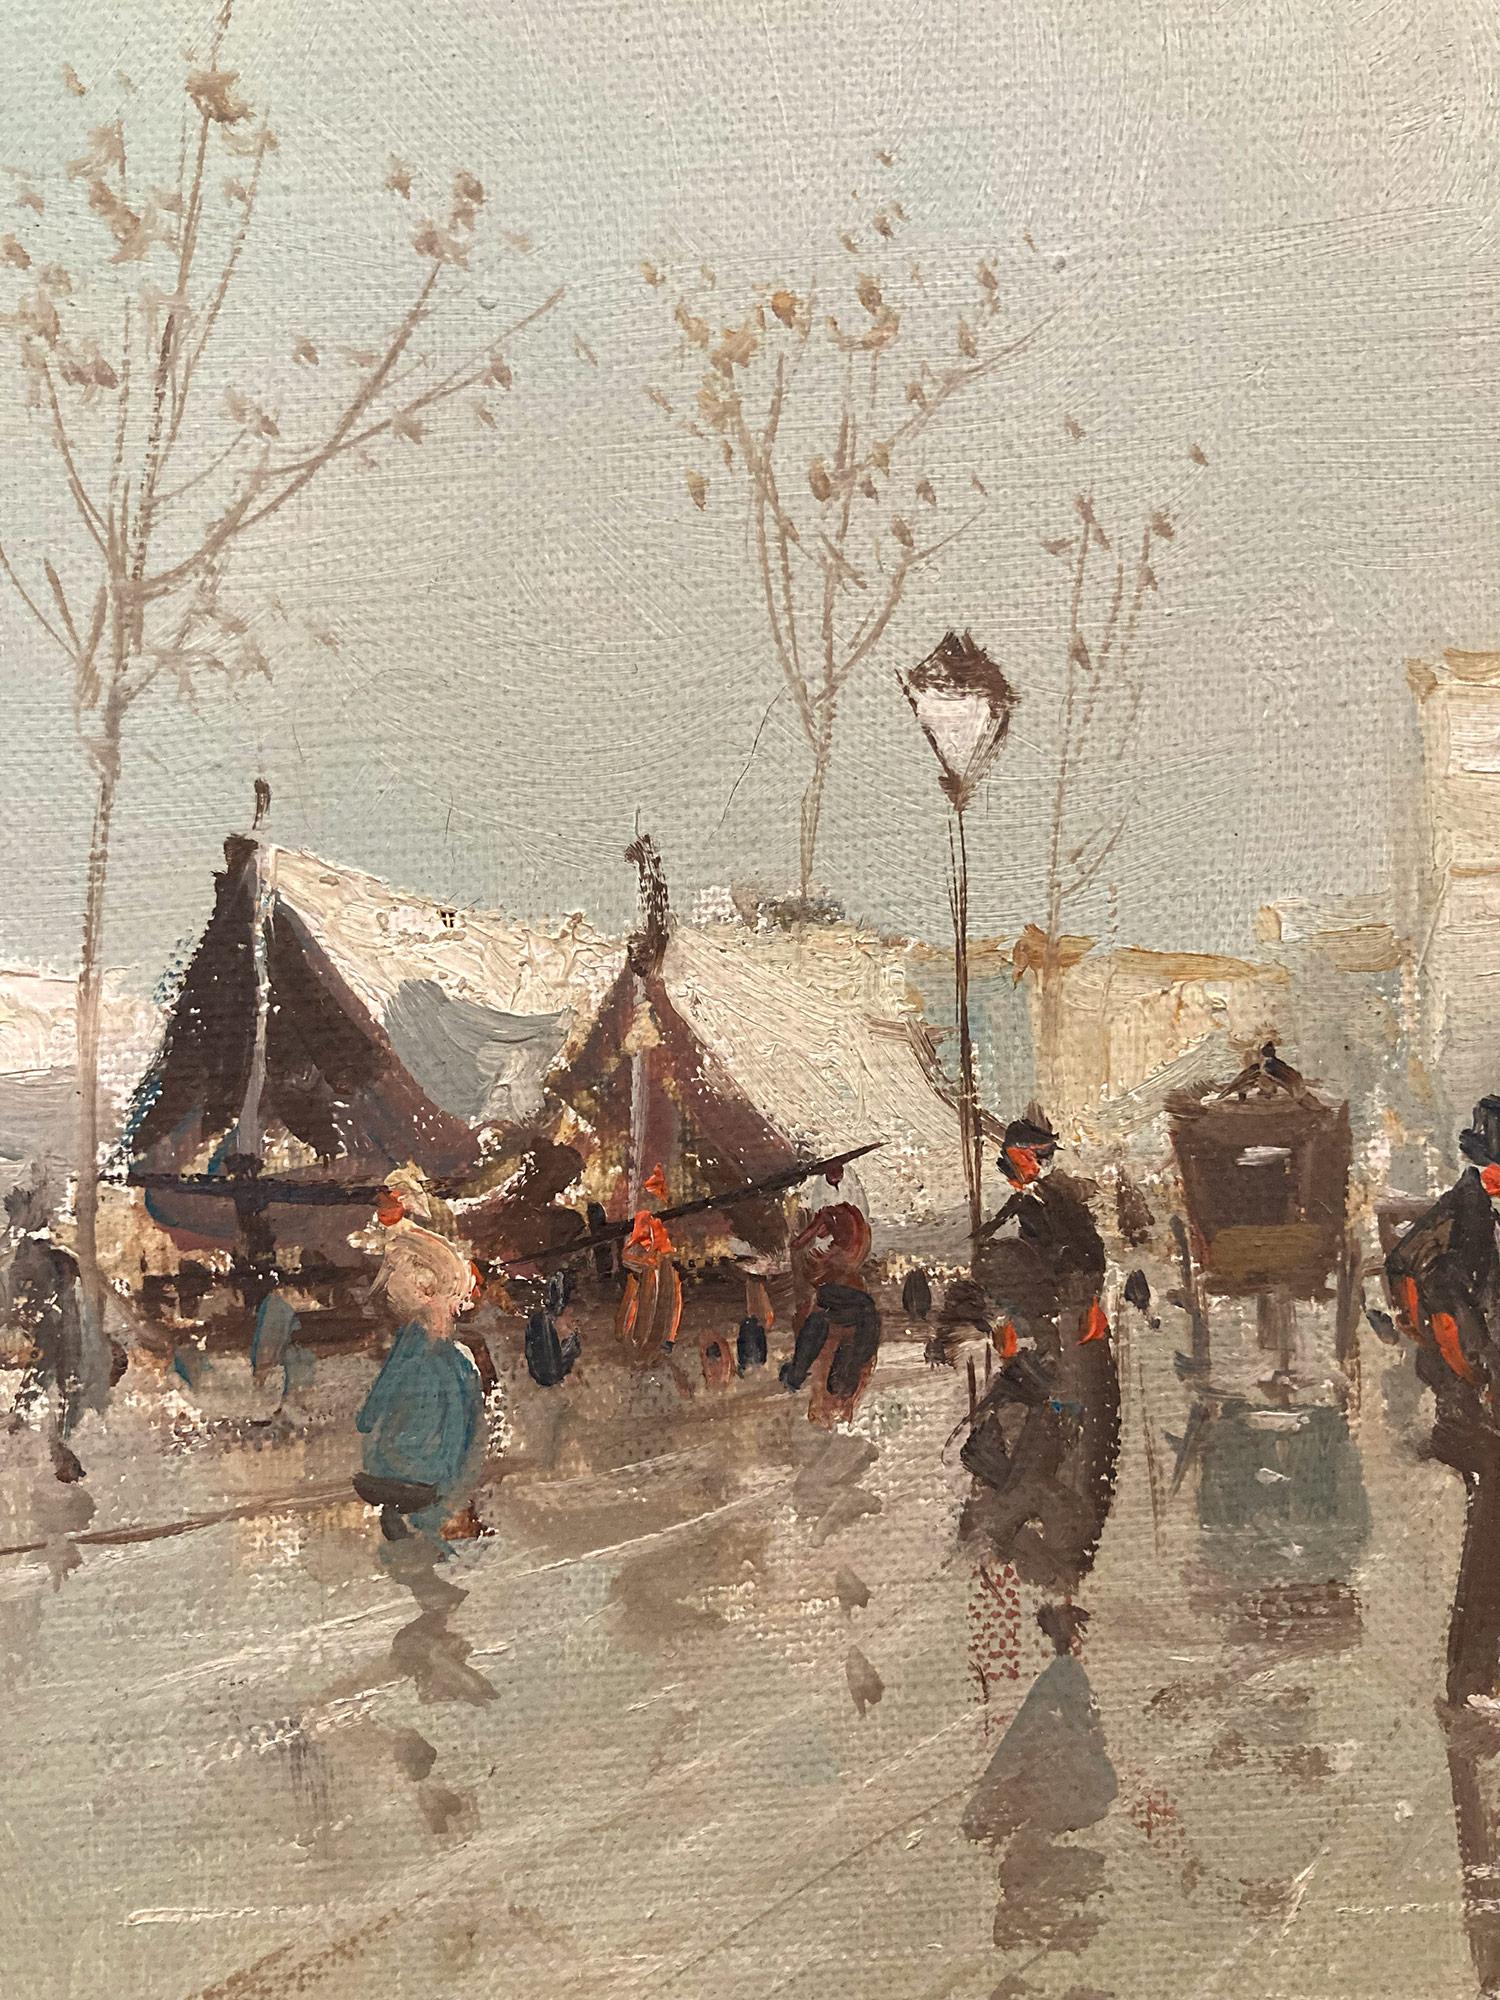 In this piece, H. Levi represents himself as a French impressionistic visual artist. There is not much information about this artist but the majority of his work was by capturing the Parisian busy street scenes from the 20th Century. He mostly used